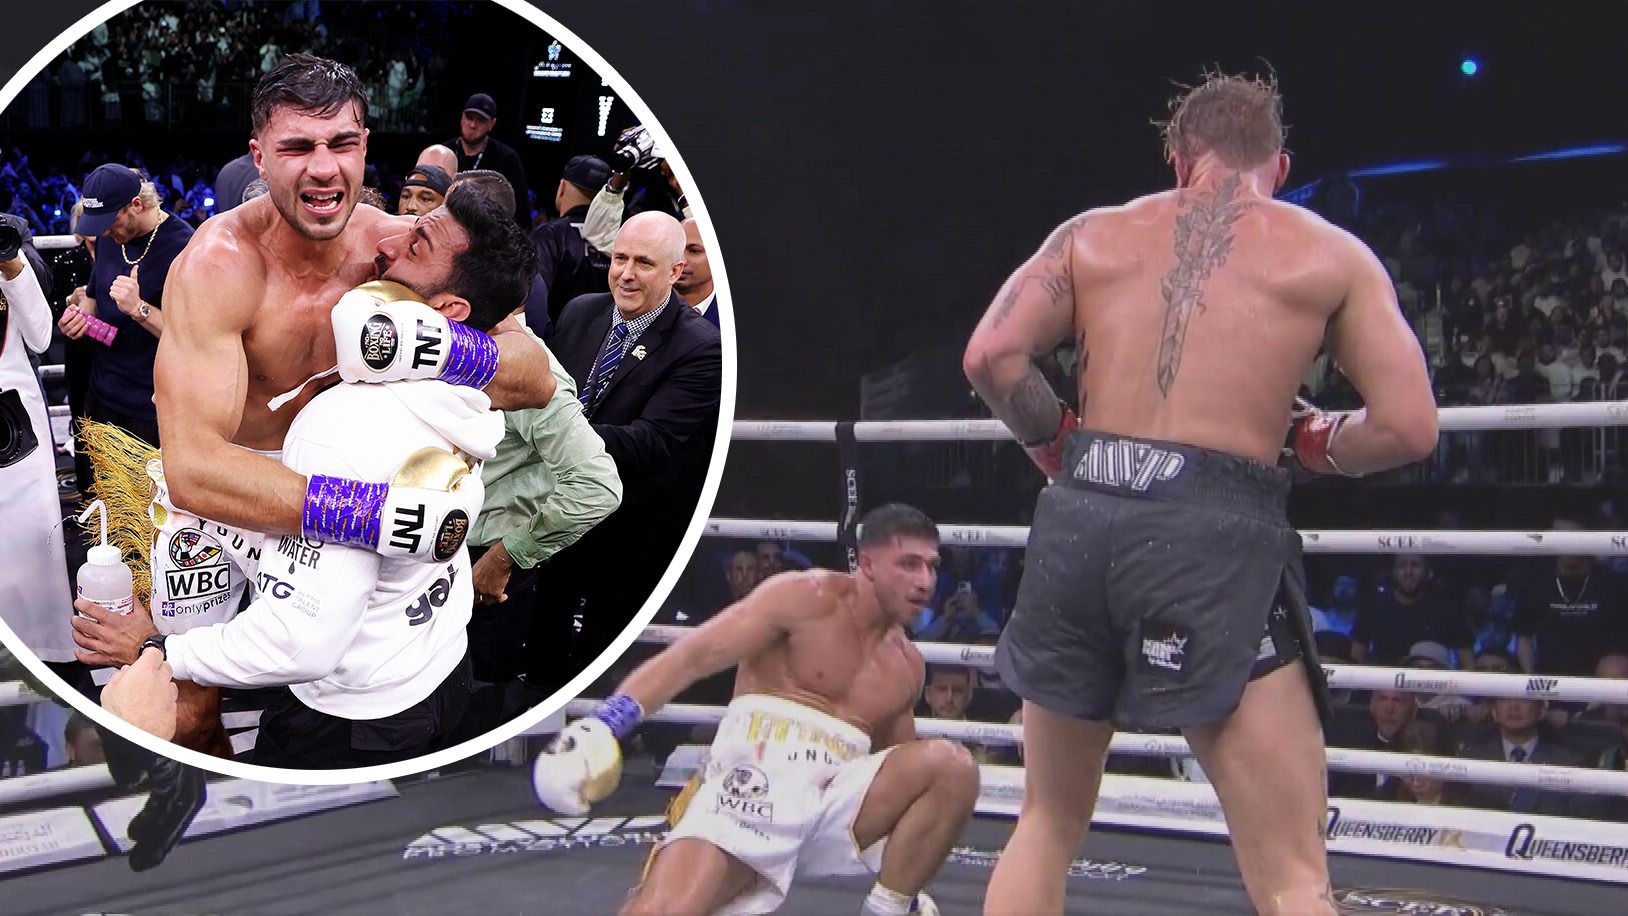 'A humbling experience': Stunning Jake Paul punch that almost stole fight against Tommy Fury